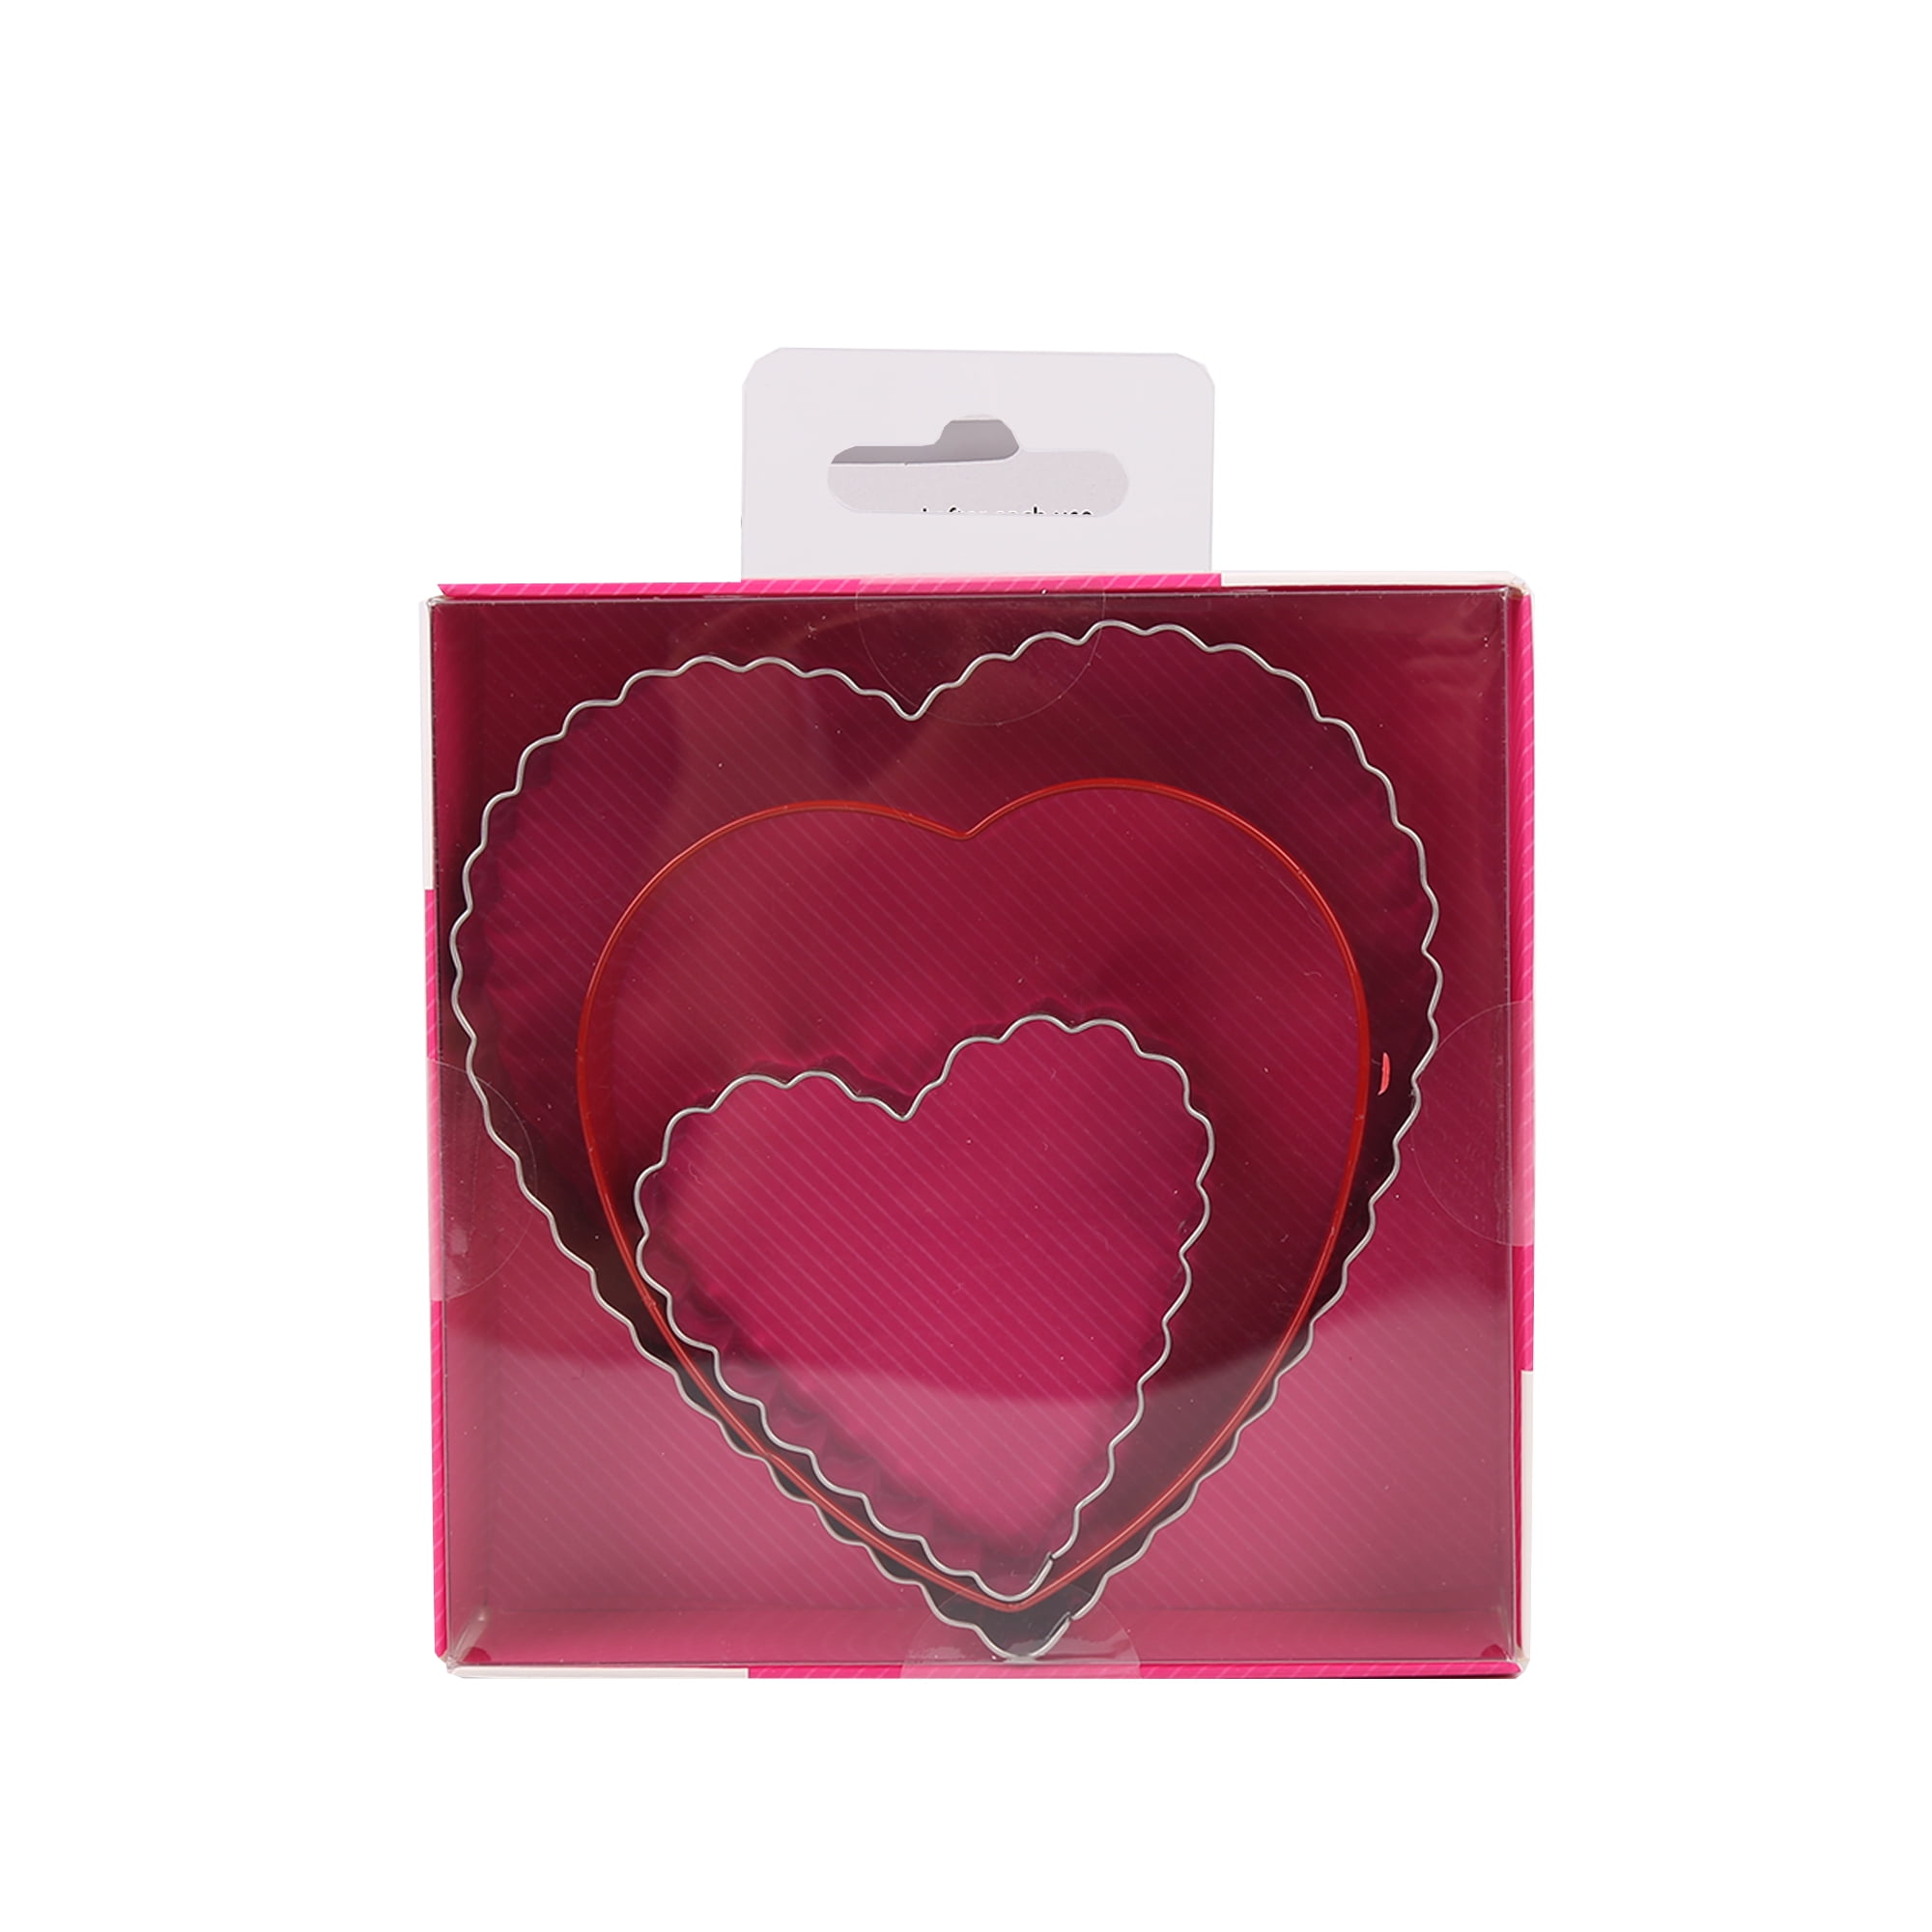 WAY TO CELEBRATE! Way To Celebrate Valentine's Day 3pk Metal Heart Cookie Cutter Set